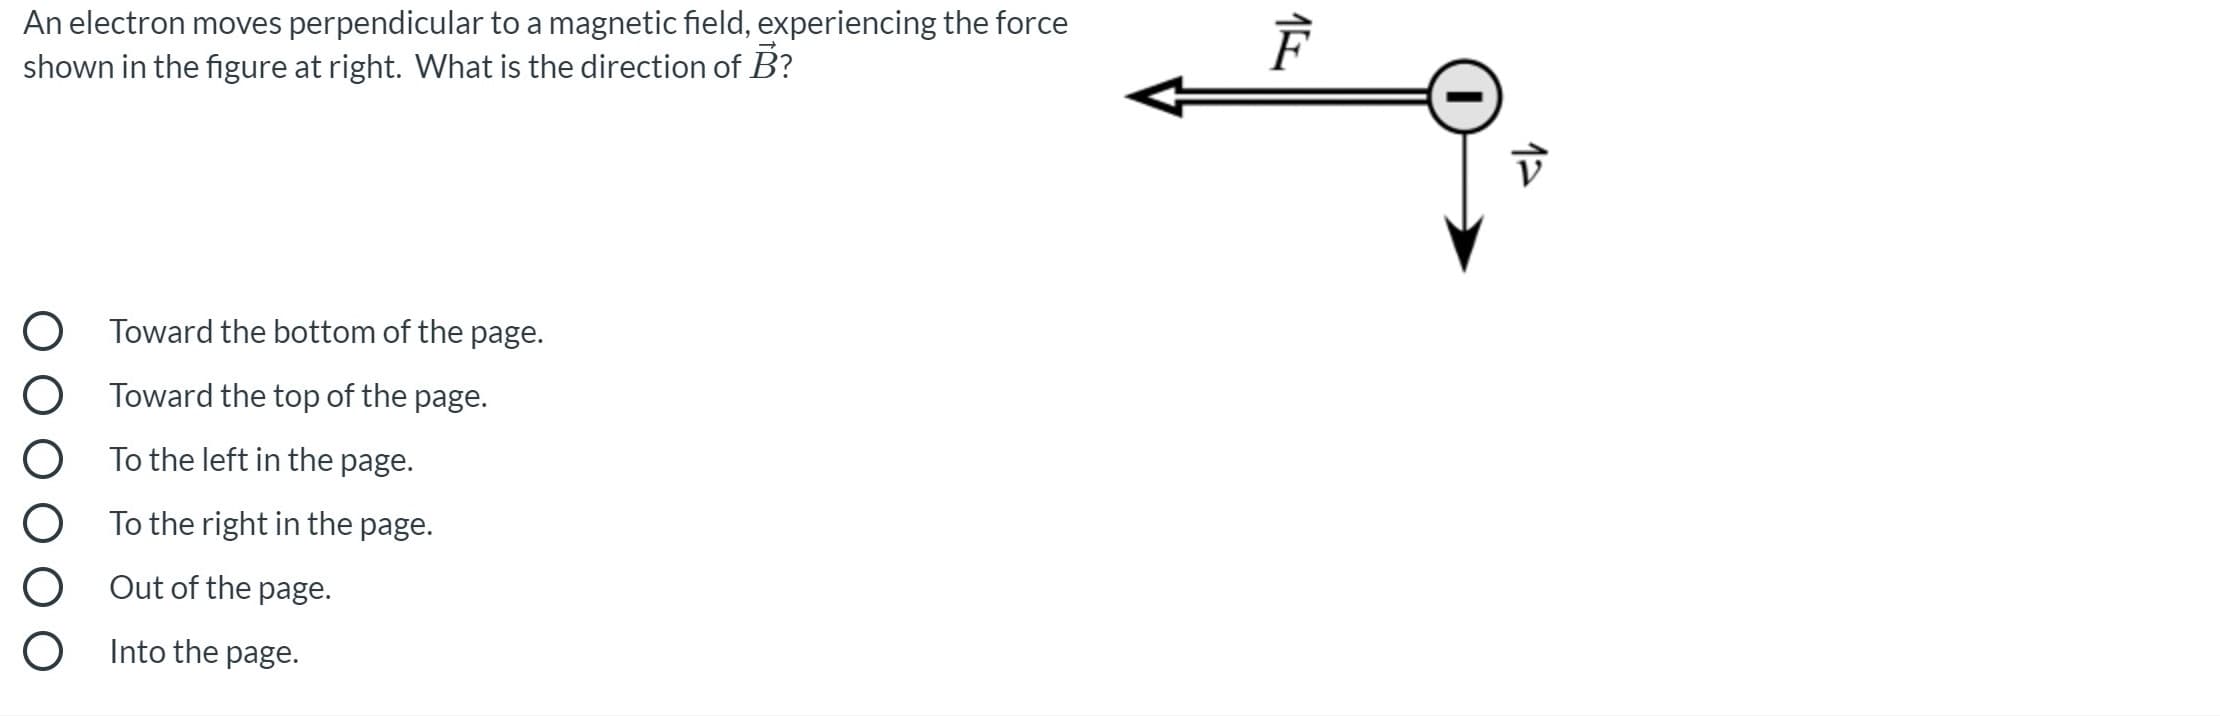 An electron moves perpendicular to a magnetic field, experiencing the force
shown in the figure at right. What is the direction of B?
Toward the bottom of the page.
Toward the top of the page.
To the left in the page.
To the right in the page.
Out of the page.
Into the page.
17
